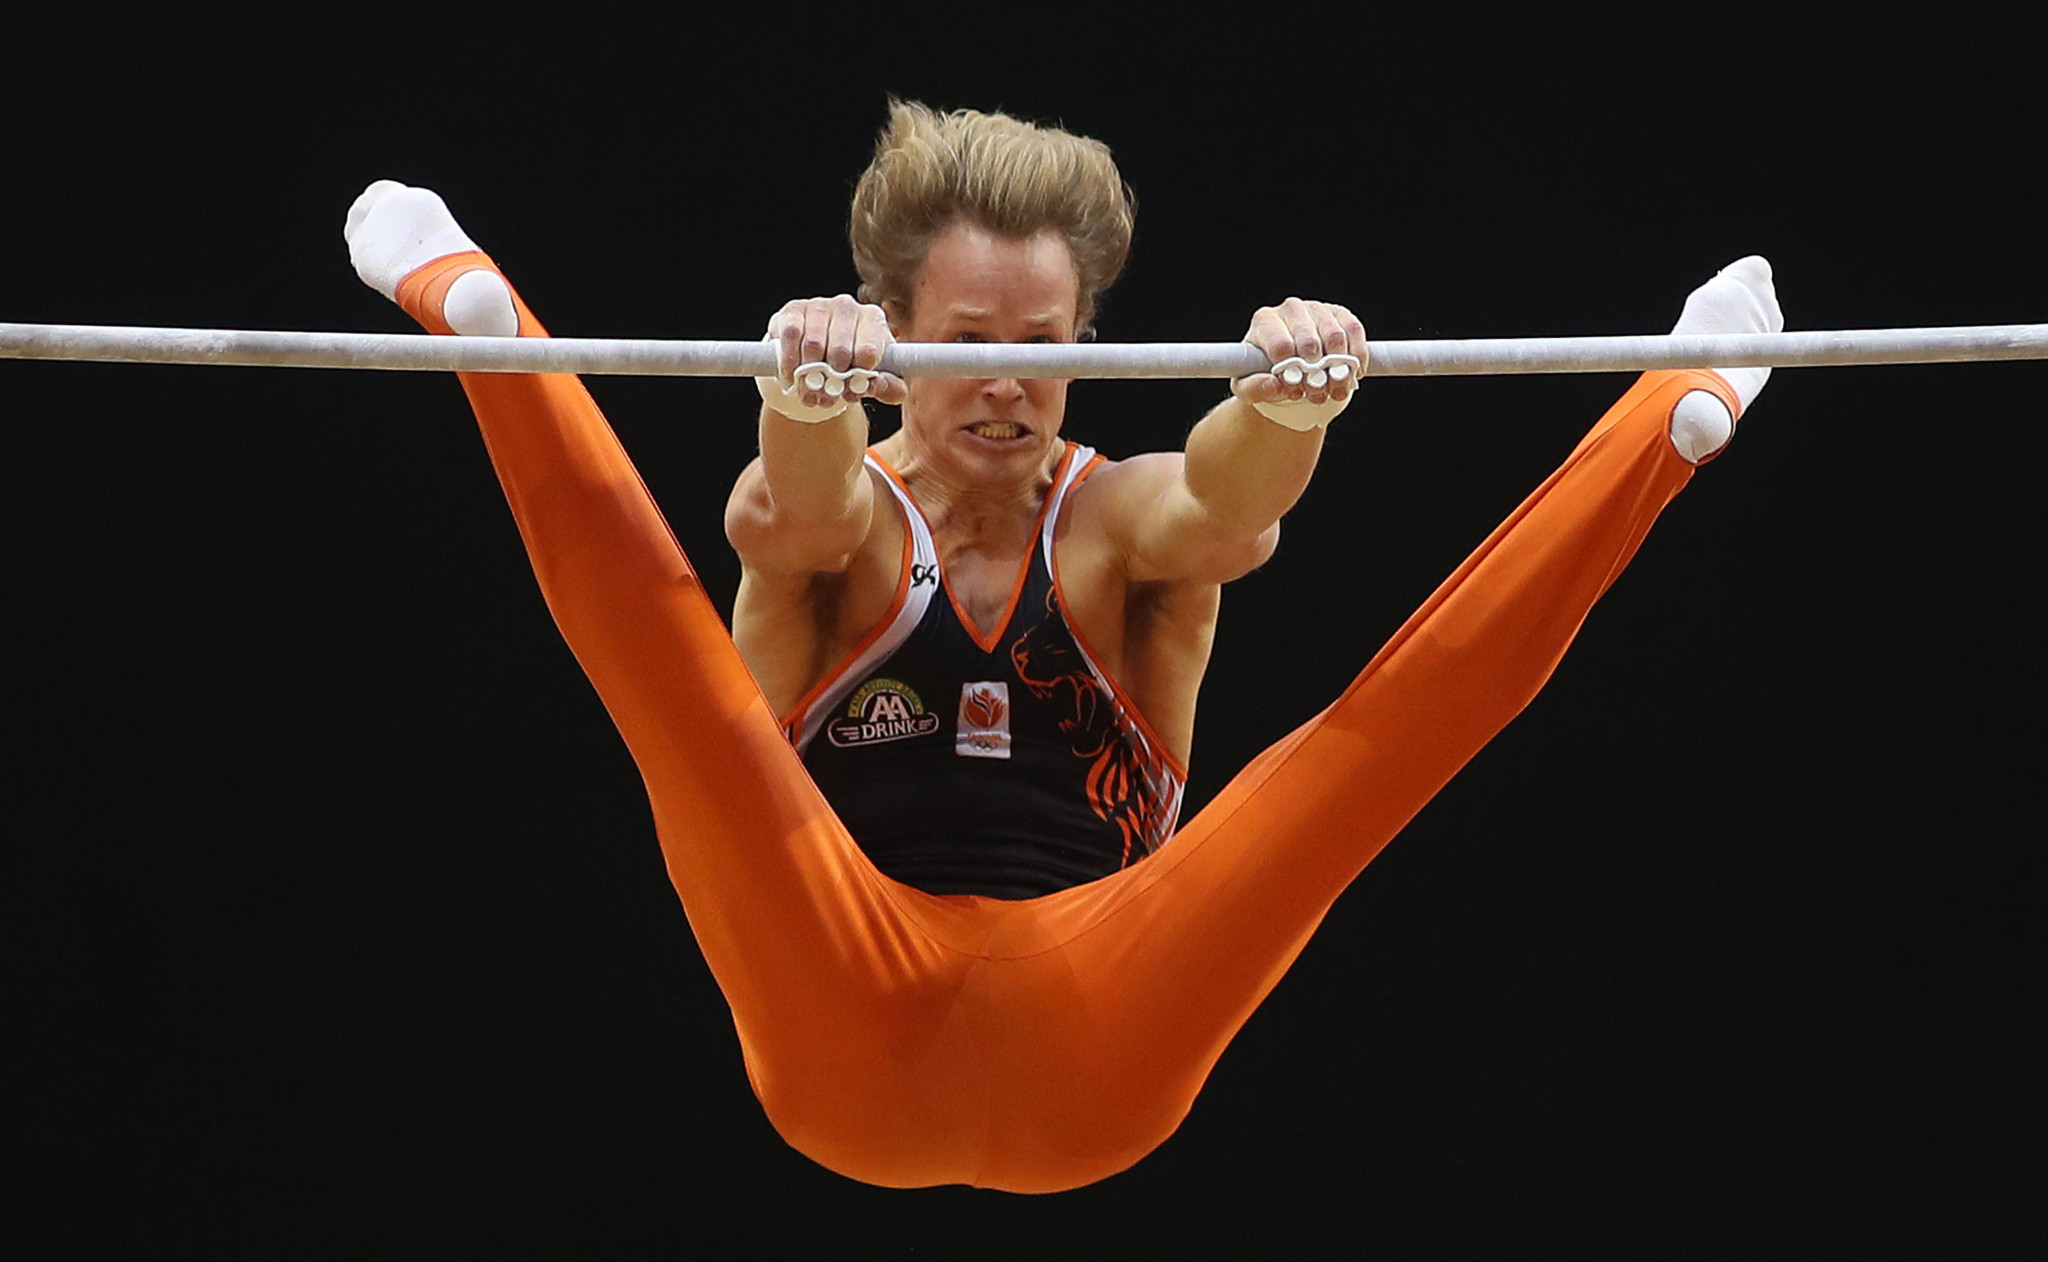 Reigning world high bar champion Epke Zonderland squeezed through to the final in eighth place ©Getty Images